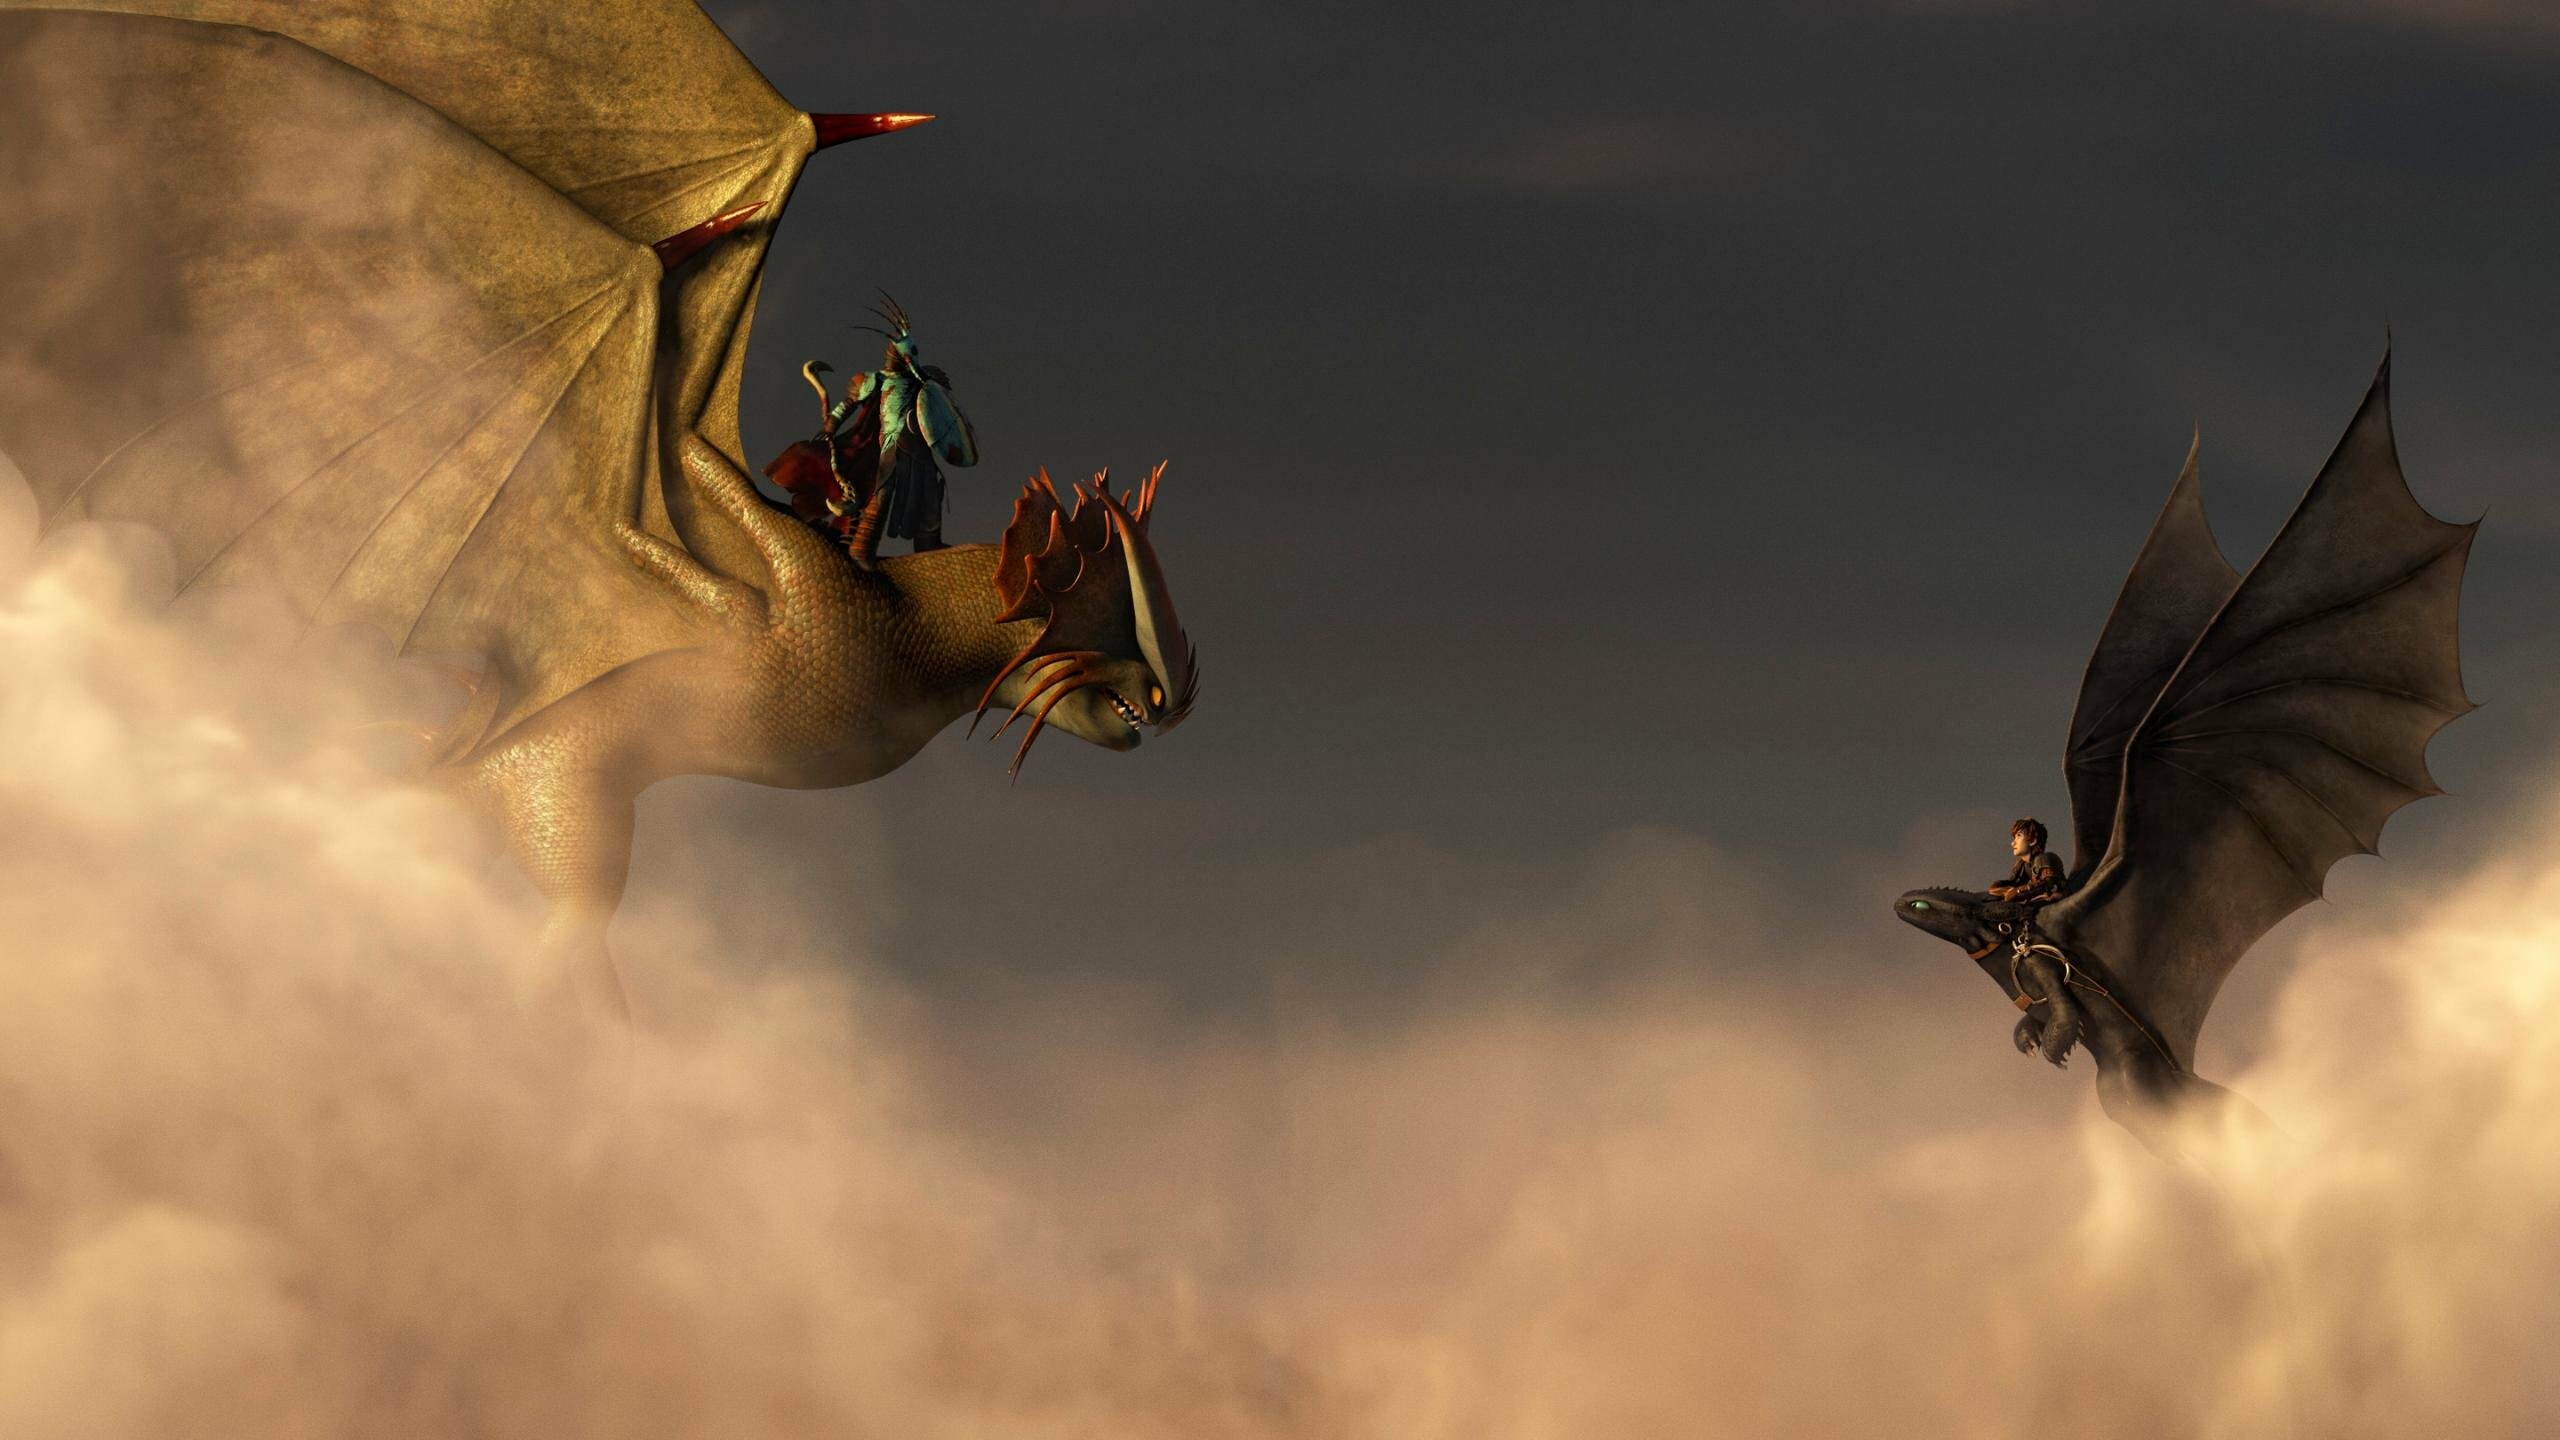 How to Train Your Dragon: Toothless, Hiccup's best friend, extremely protective of his Viking soul mate. 2560x1440 HD Wallpaper.